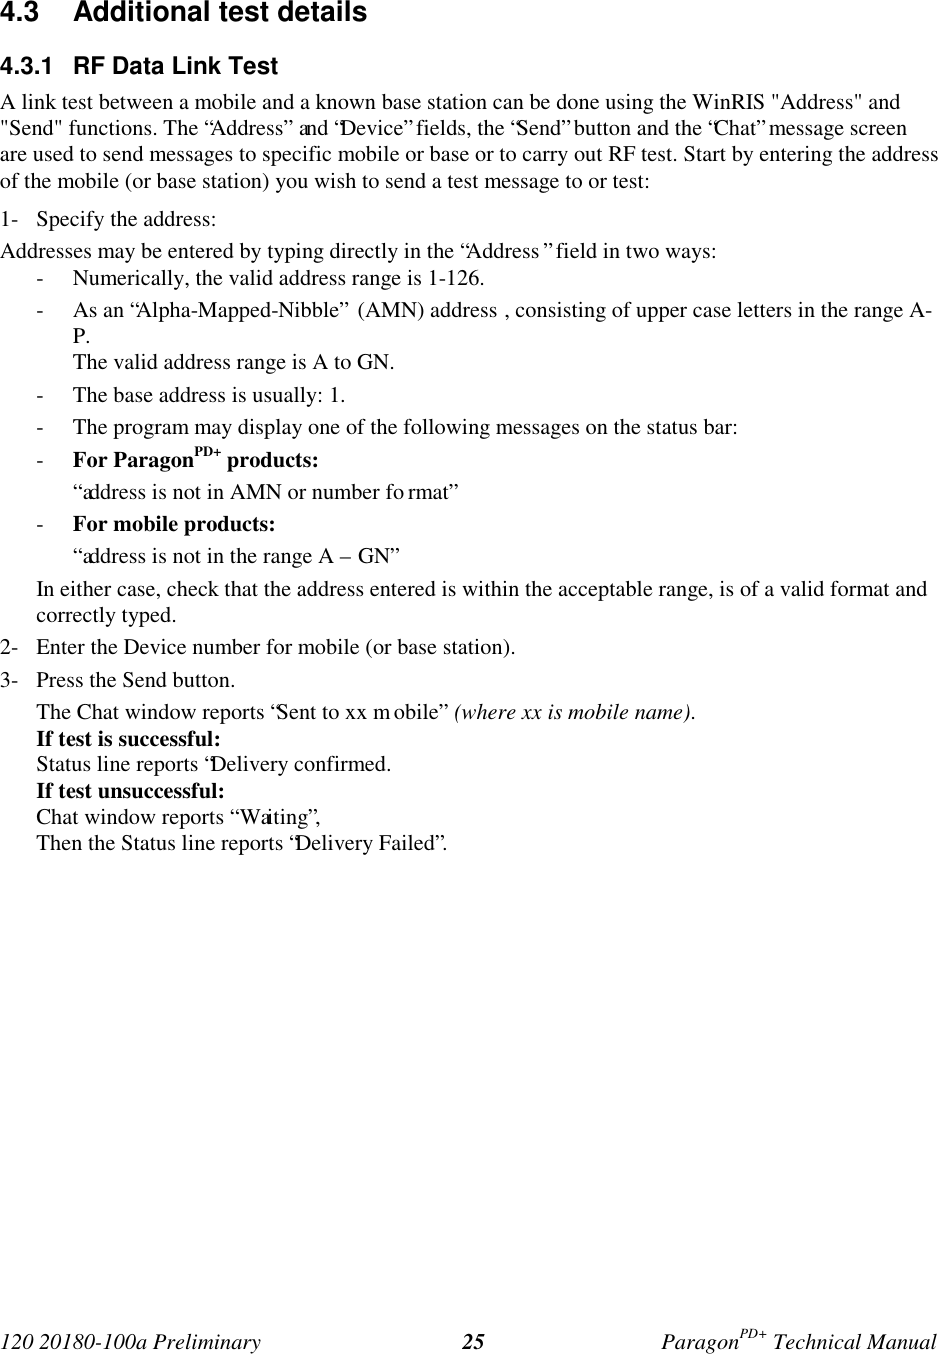 Page 32 of CalAmp Wireless Networks BDD4T85-1 Paragon/PD User Manual Parg PD  T100a Prelim